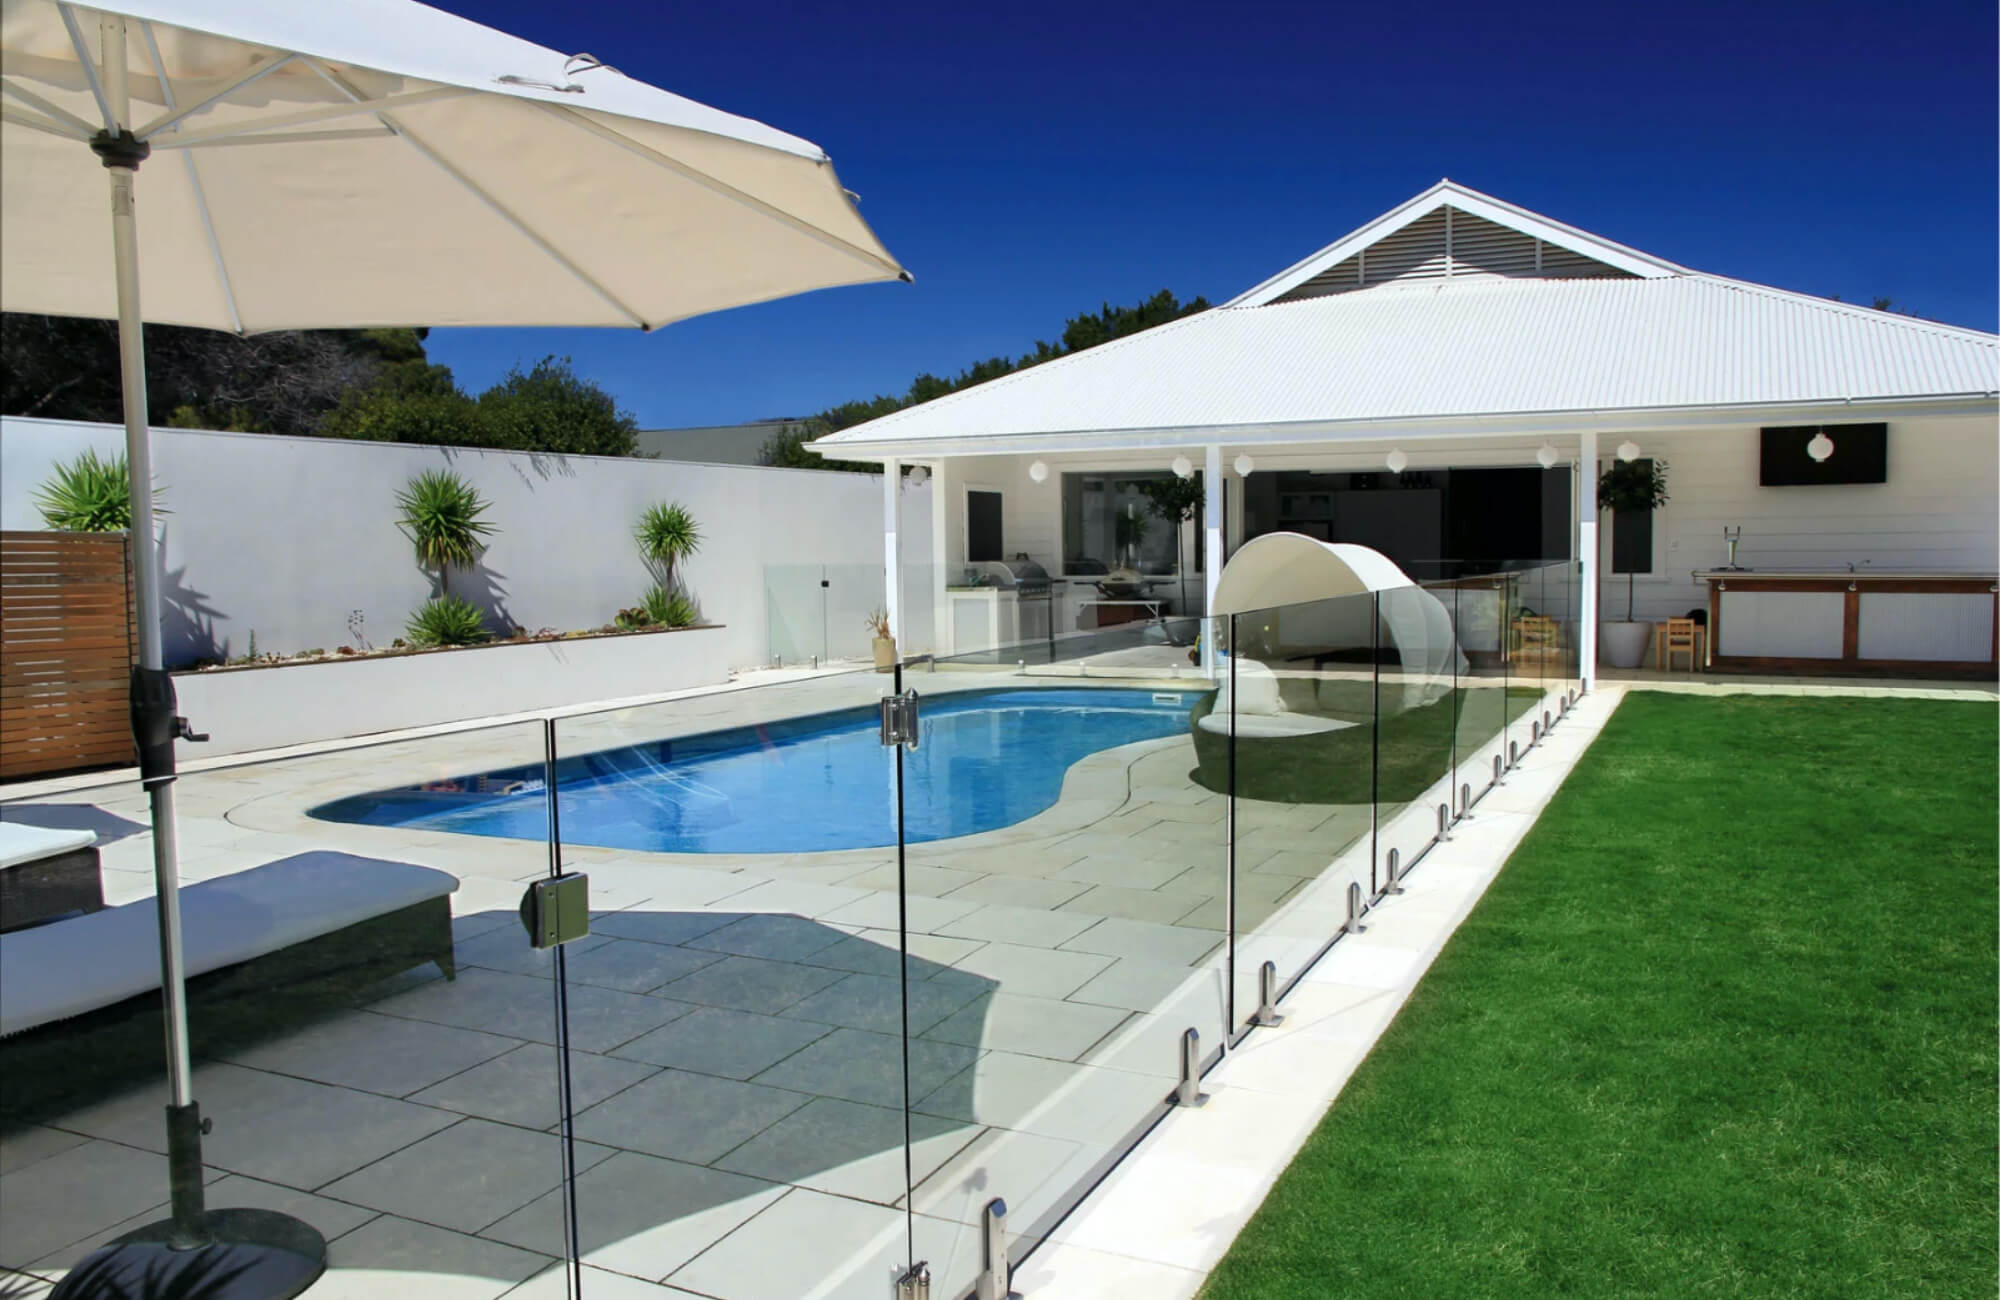 glass-pool-fencing-1